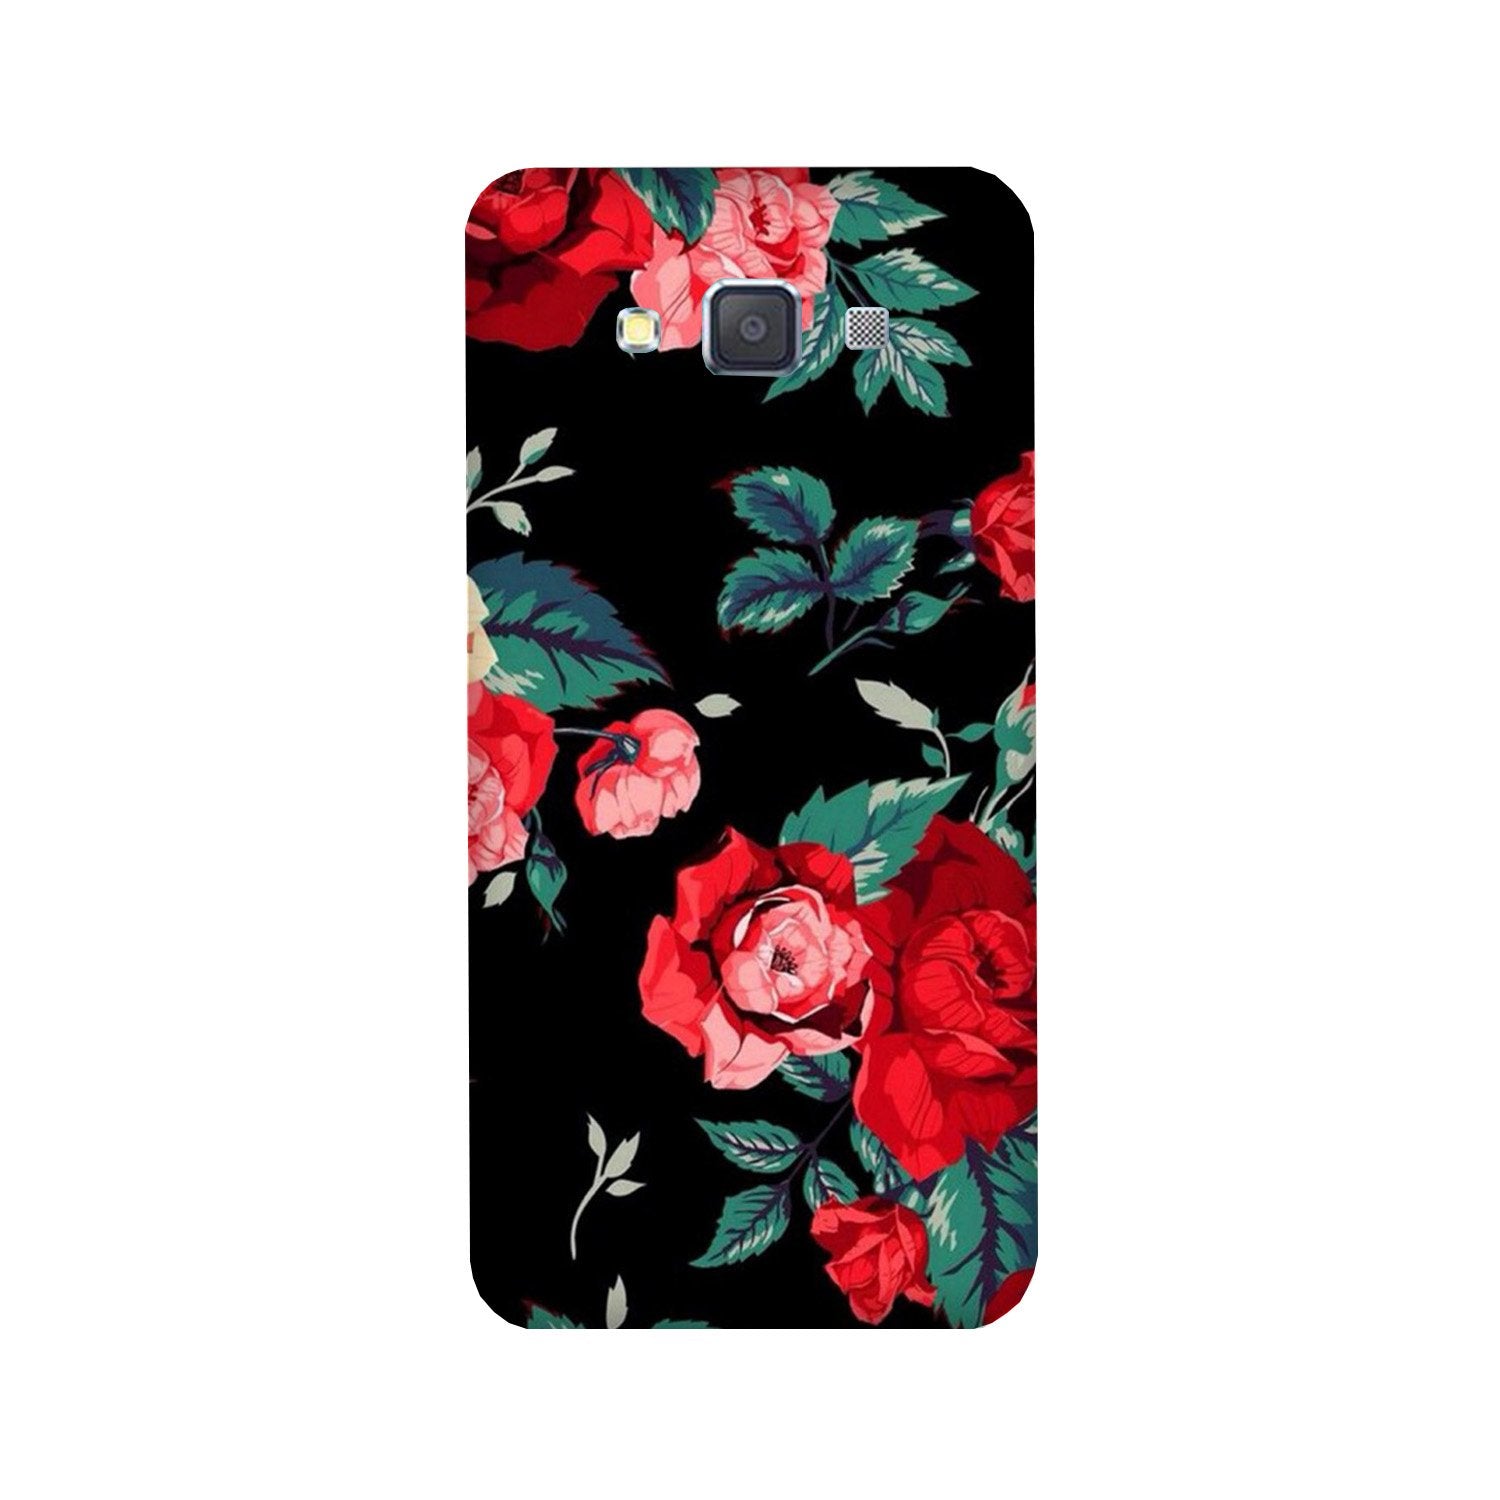 Red Rose2 Case for Galaxy Grand Max